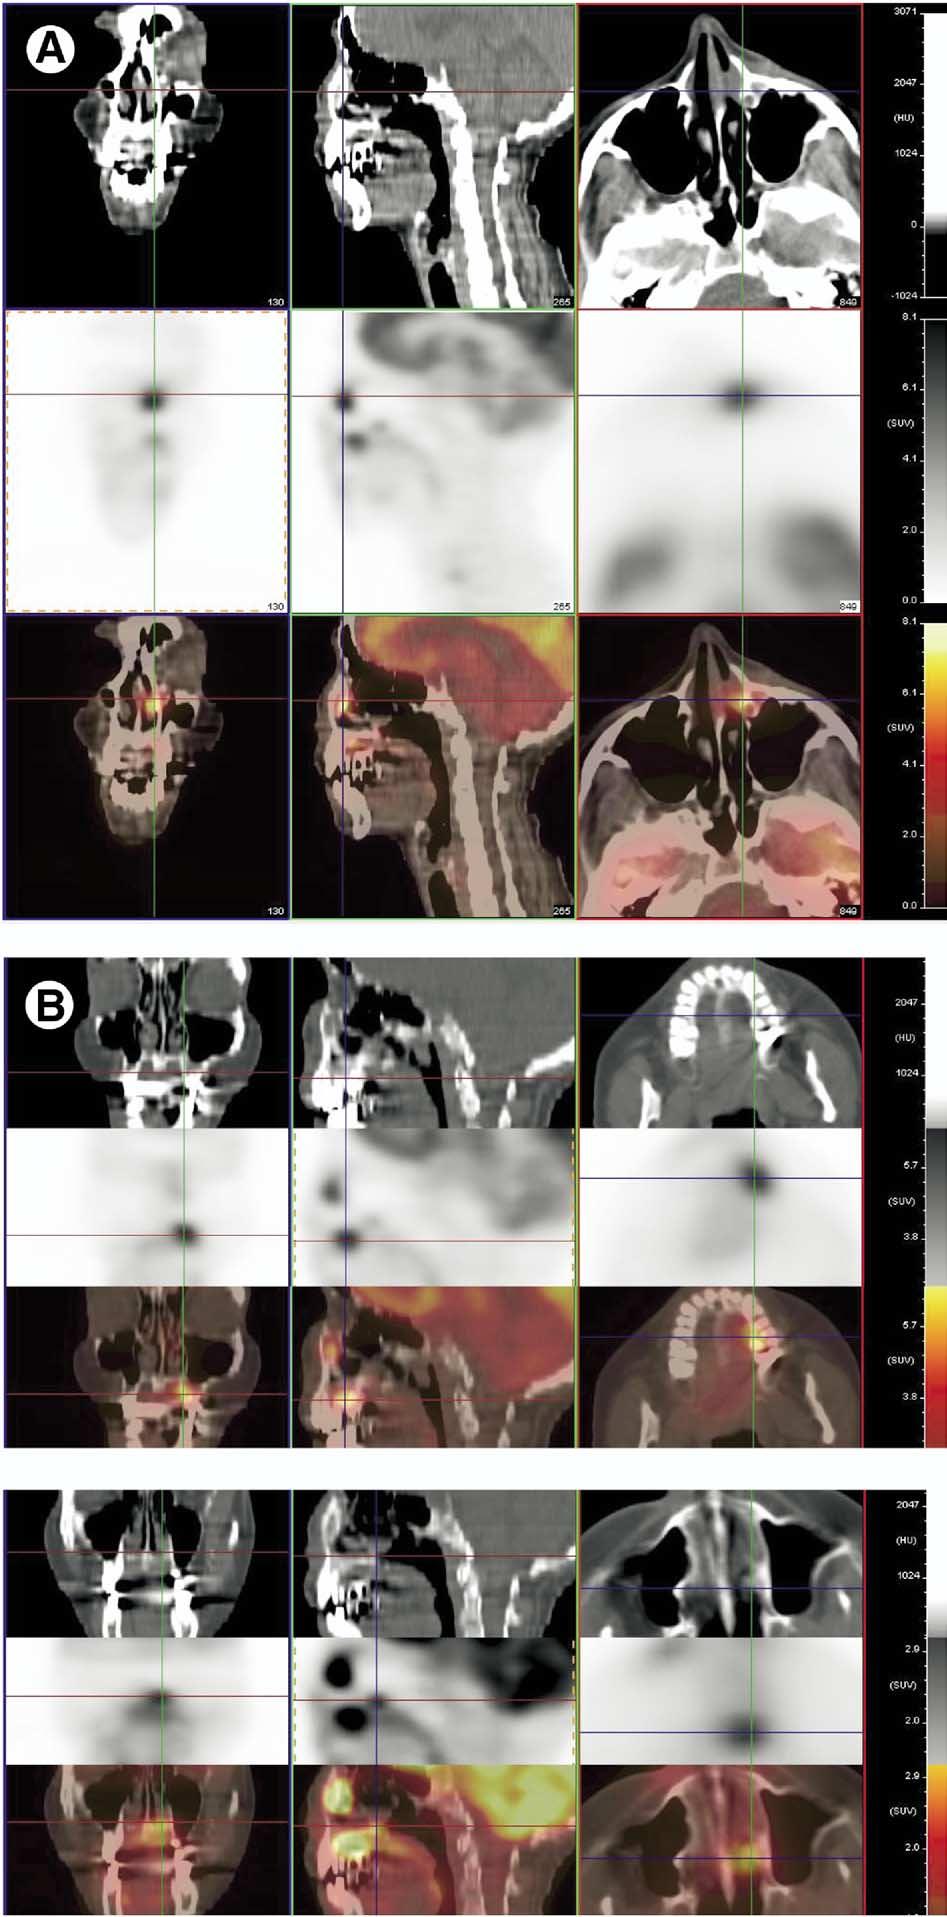 PET-CT Imaging of head and neck tumors: An atlas 229 Figure 9 (A) Squamous cell carcinoma of the nasolacrimal duct. These cancers present relatively early because of obstruction of the lacrimal duct.